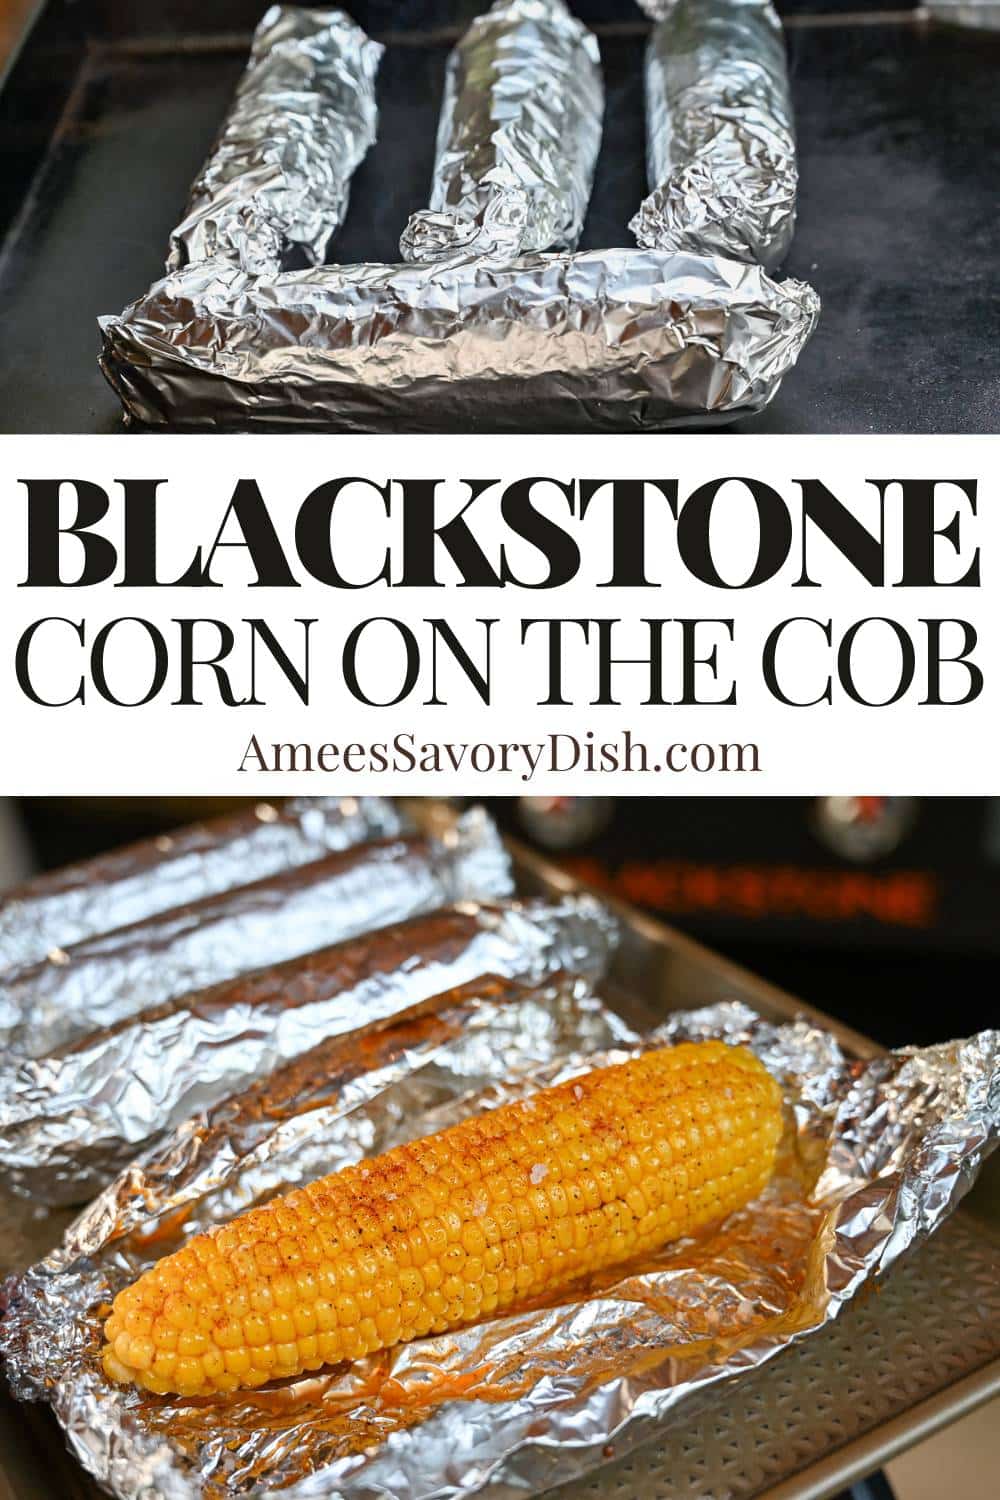 Fire up the griddle! This method consists of searing foil-wrapped, seasoned sweet corn on a flat-top grill for the easiest tastiest corn! via @Ameessavorydish